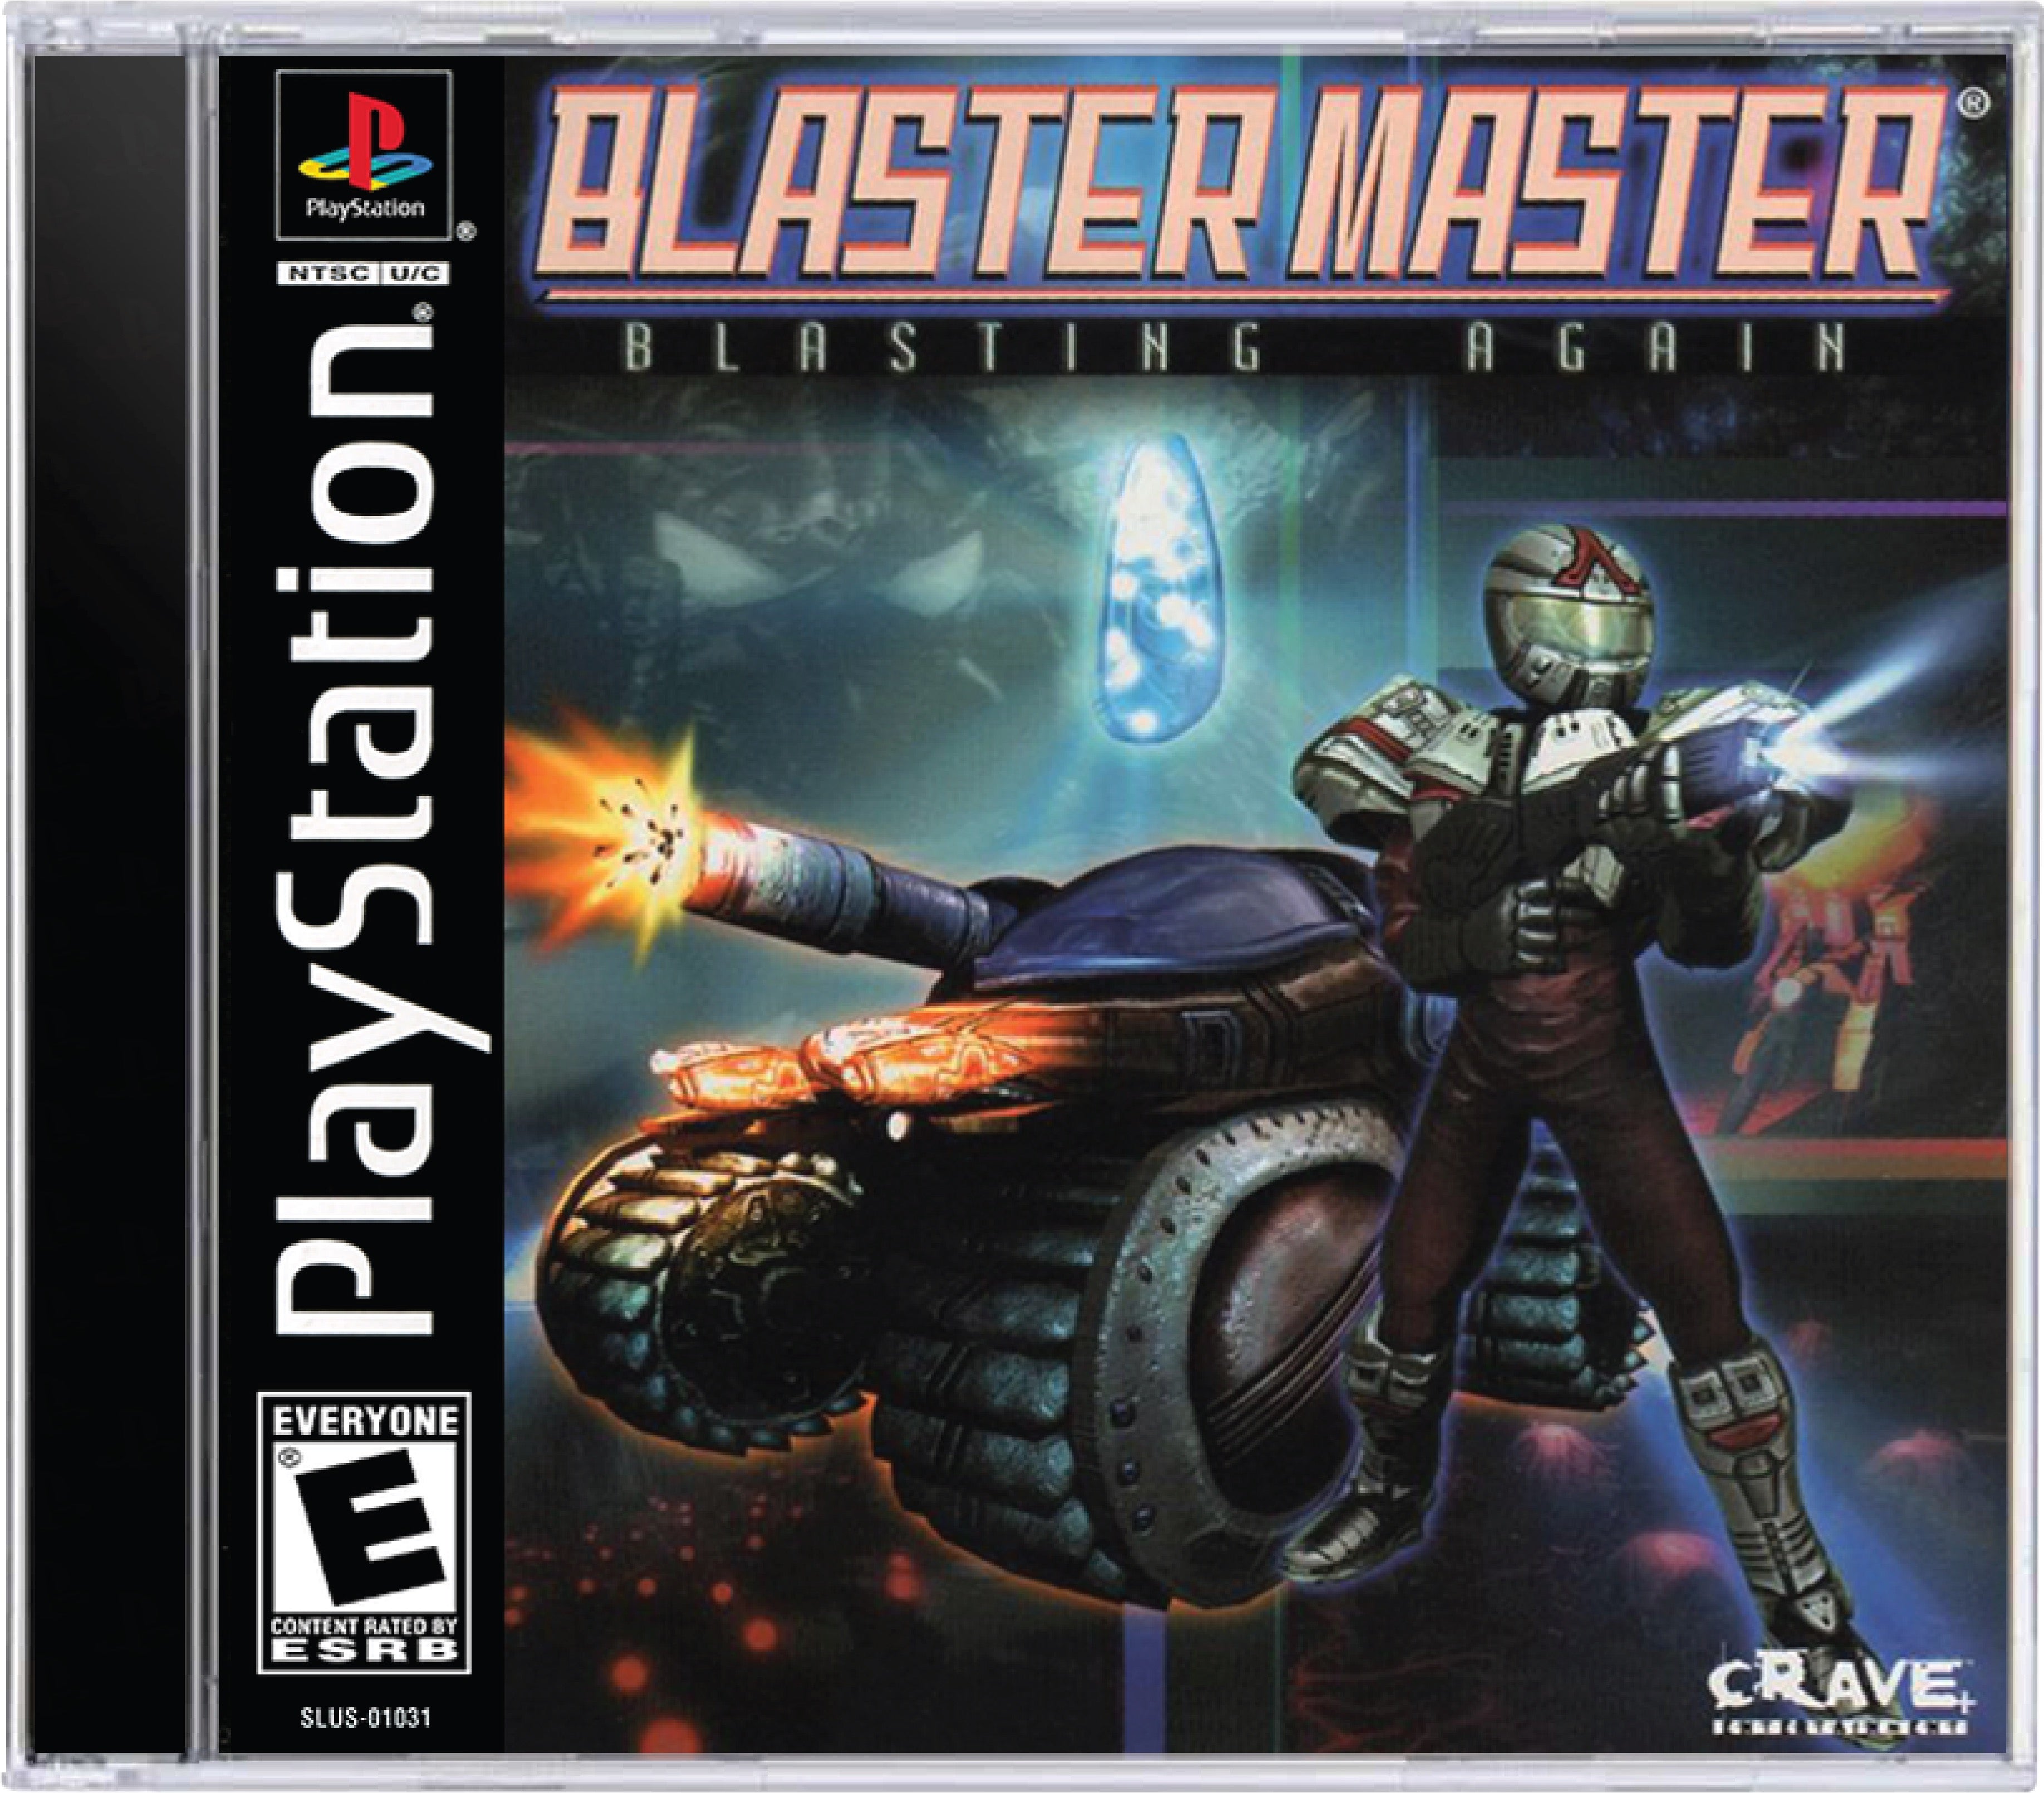 Blaster Master Blasting Again Cover Art and Product Photo